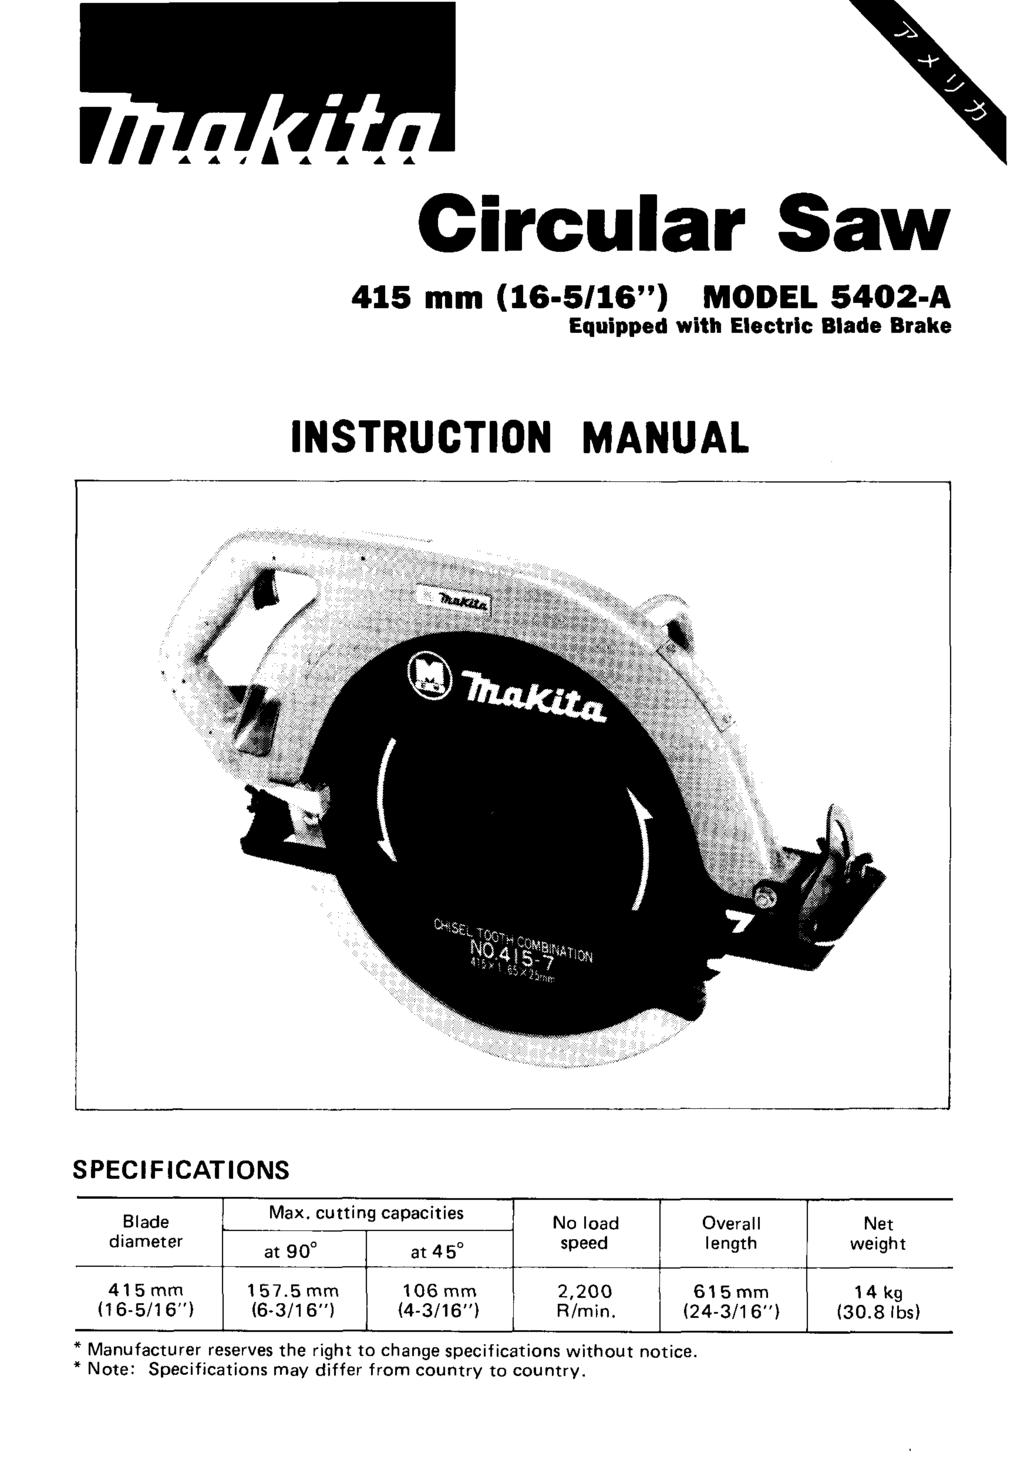 Circular Saw 415 mm (16-5/16") MODEL 5402-A Equipped with Electric Blade Brake INSTRUCTION MANUAL S PECl F ICATIONS diameter at 90" at 45" speed length weight 415" (1 6-5/16") 157.